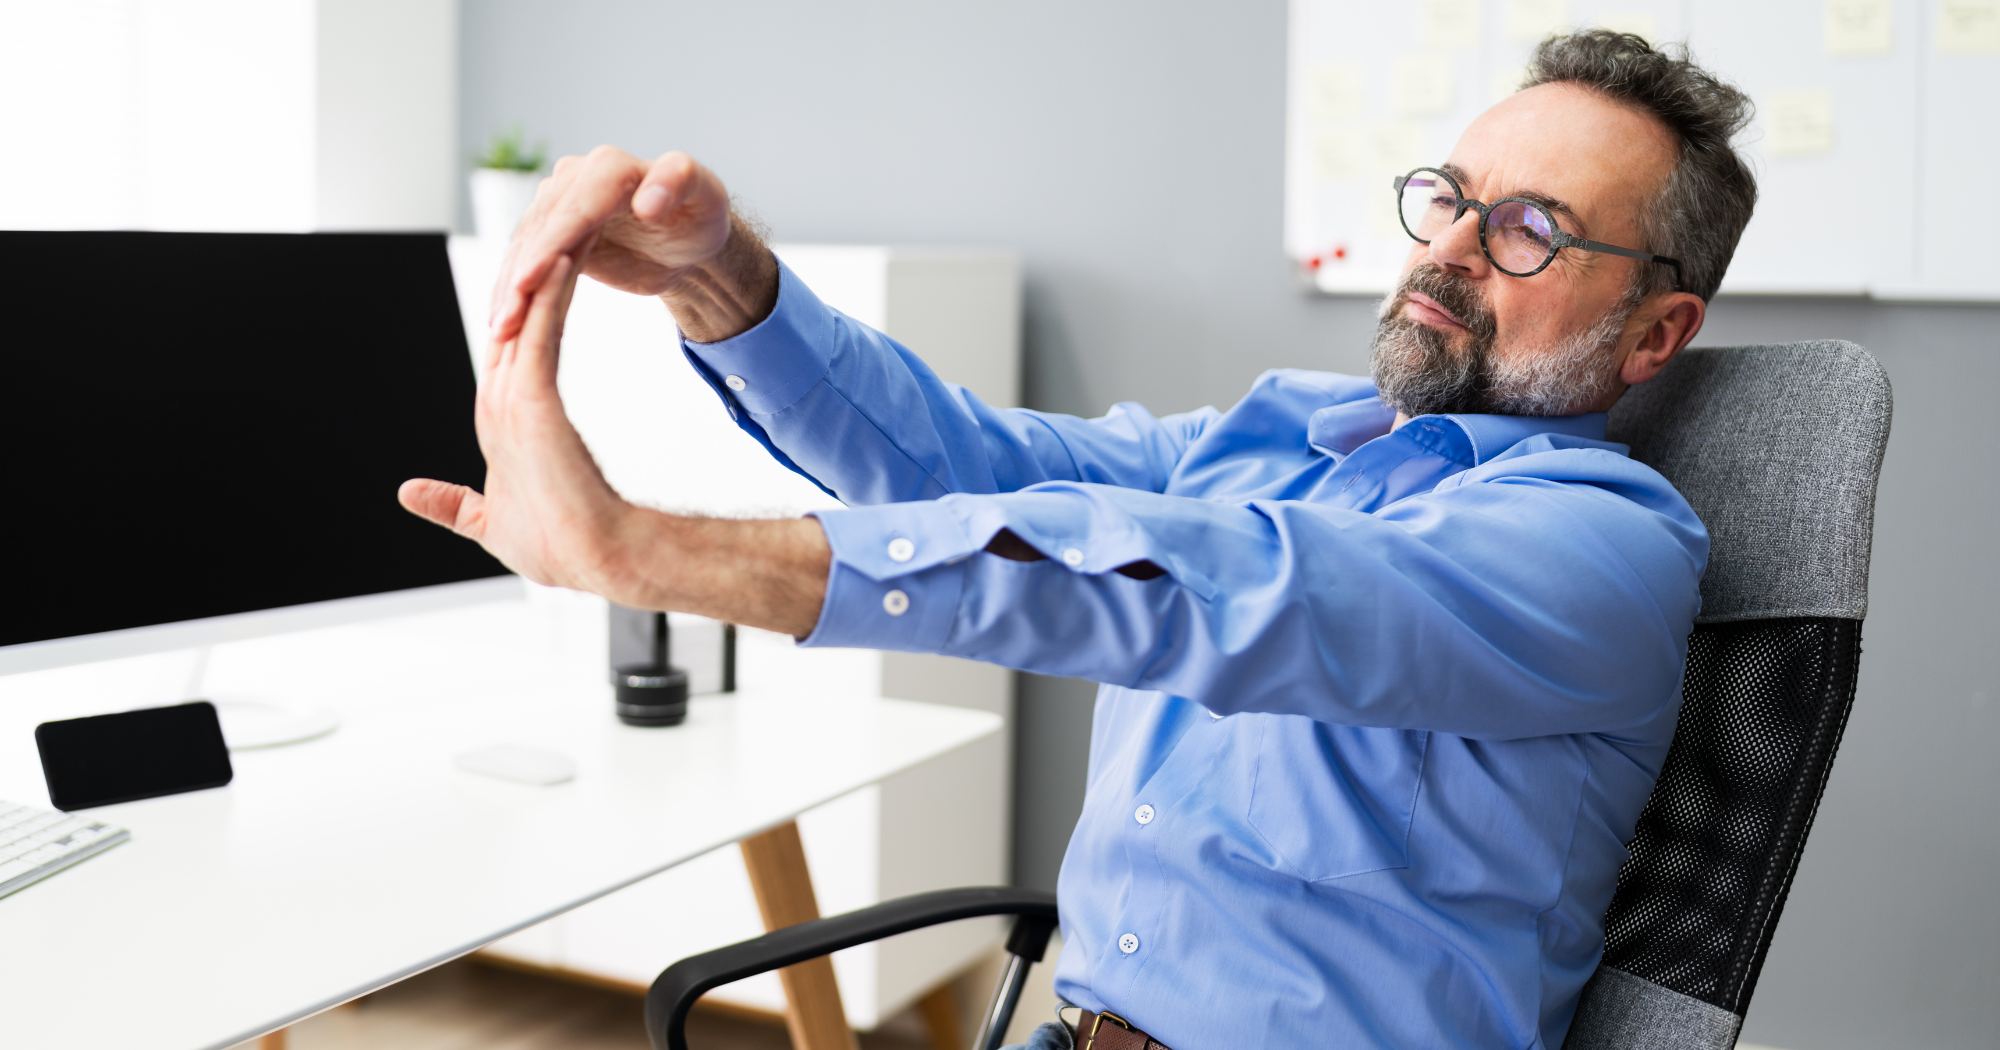 Deskercise: Essential Stretches for the Office Worker